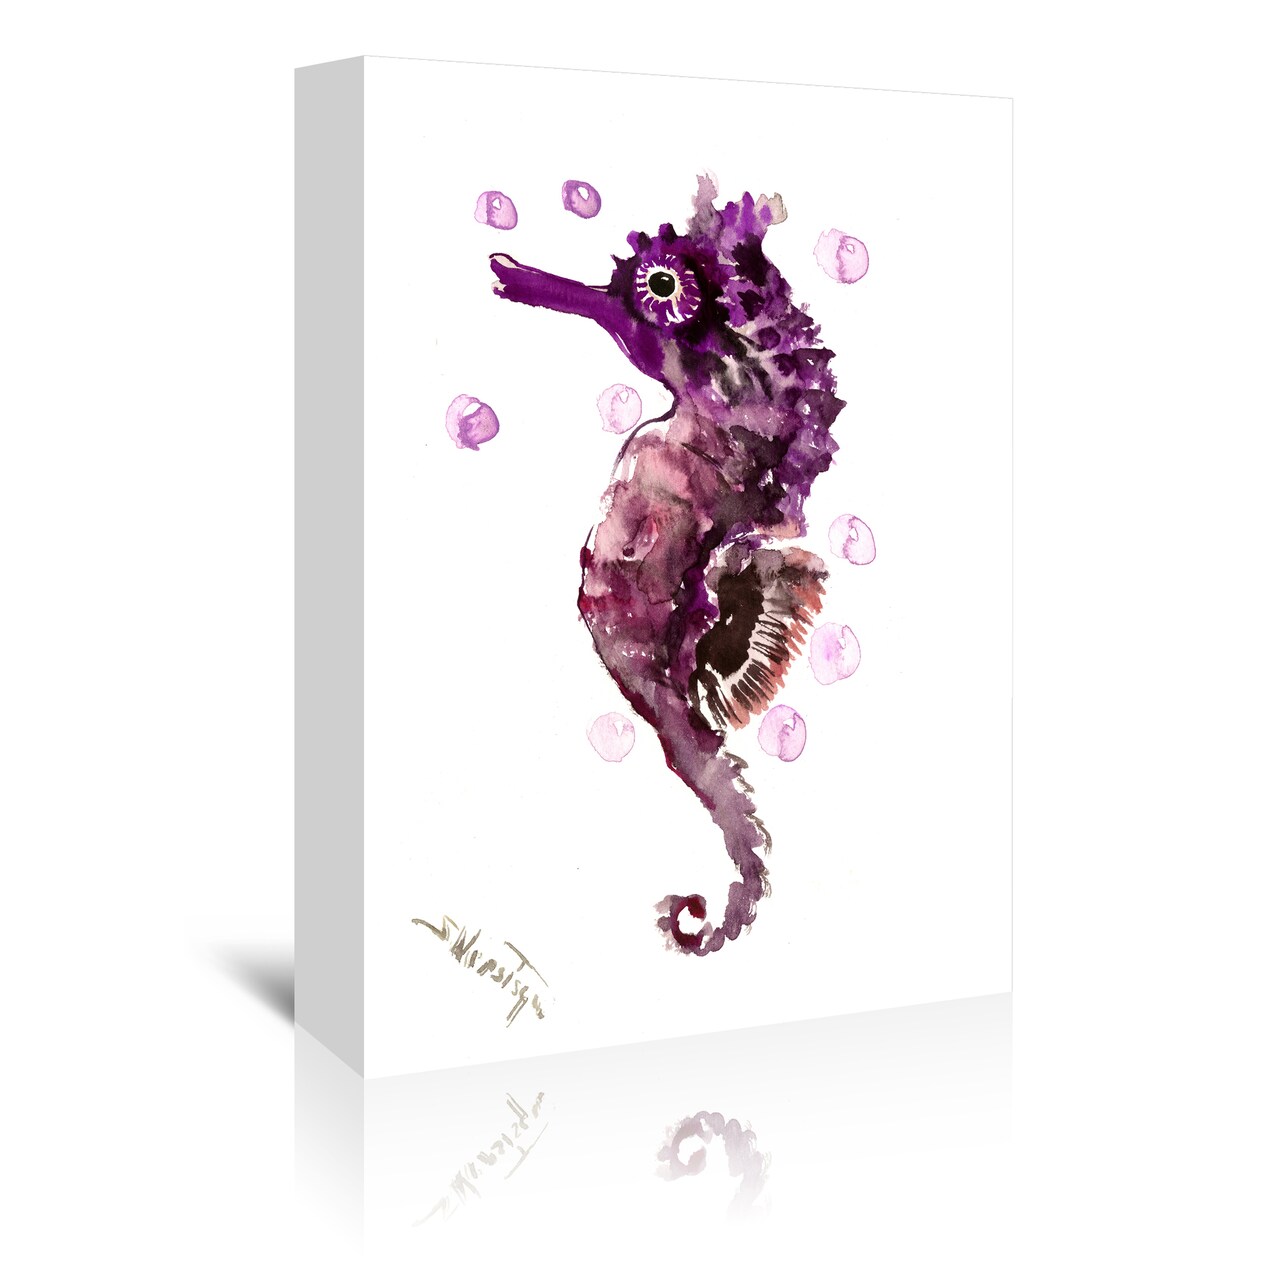 Seahorse  by Suren Nersisyan  Gallery Wrapped Canvas - Americanflat